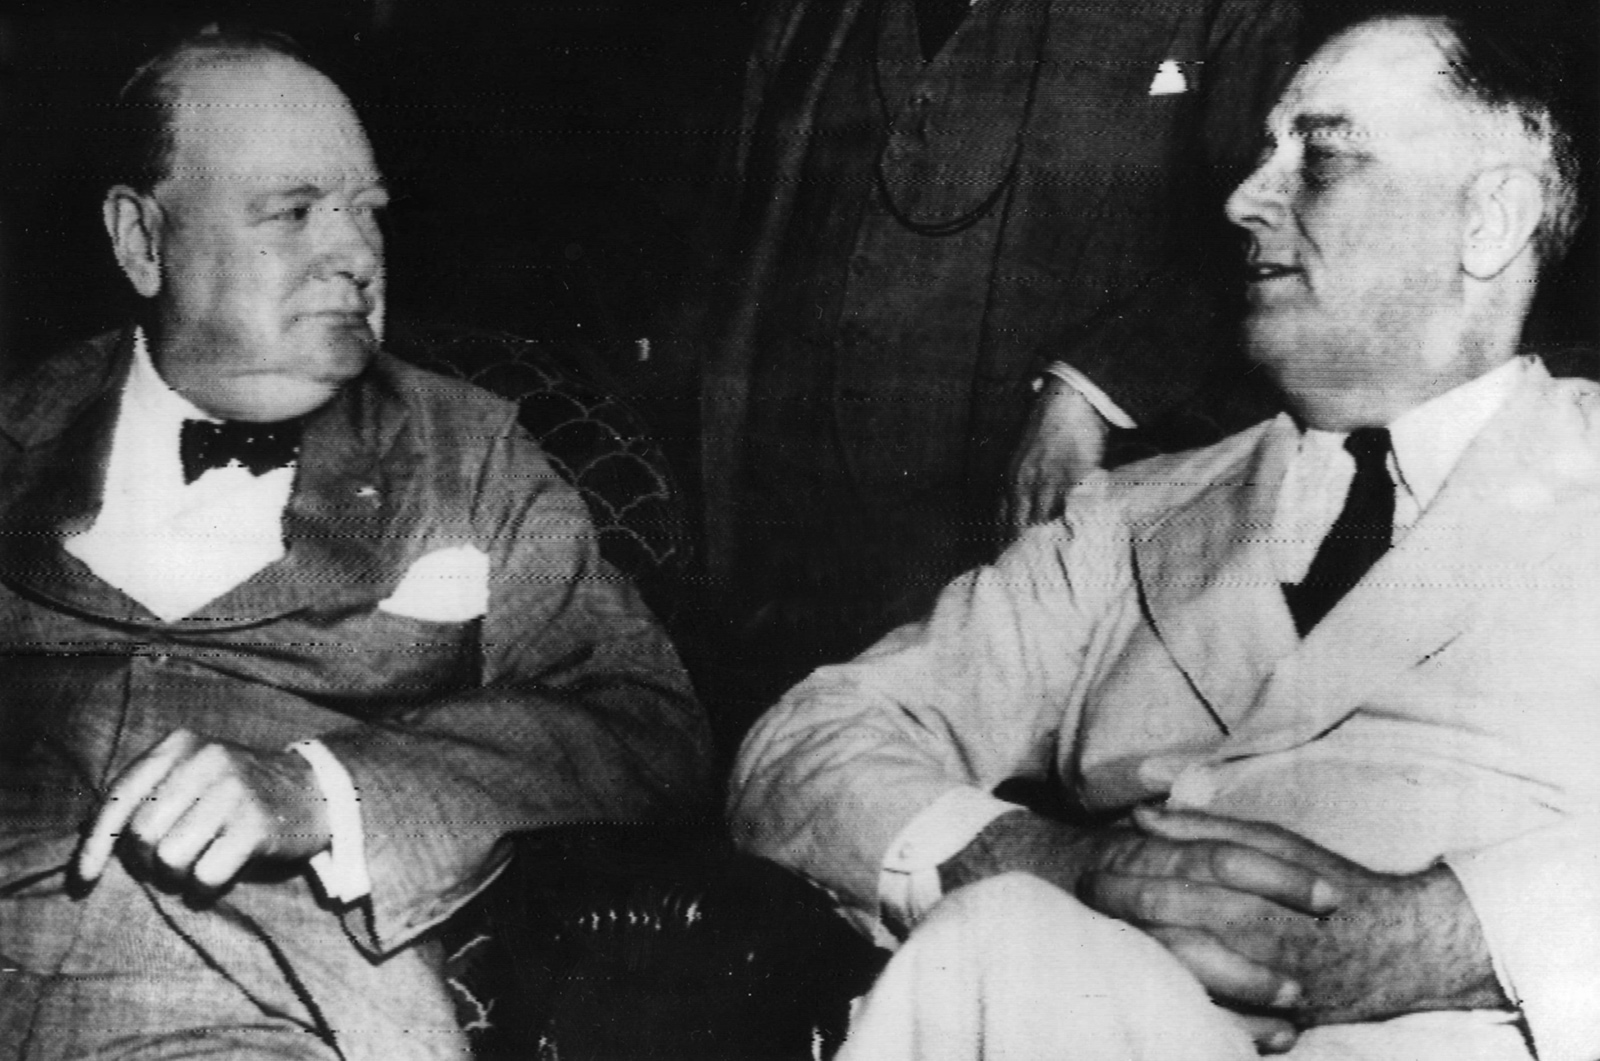 Winston Churchill and Franklin Roosevelt at a meeting of the Pacific War Council, Washington, D.C., June 1942